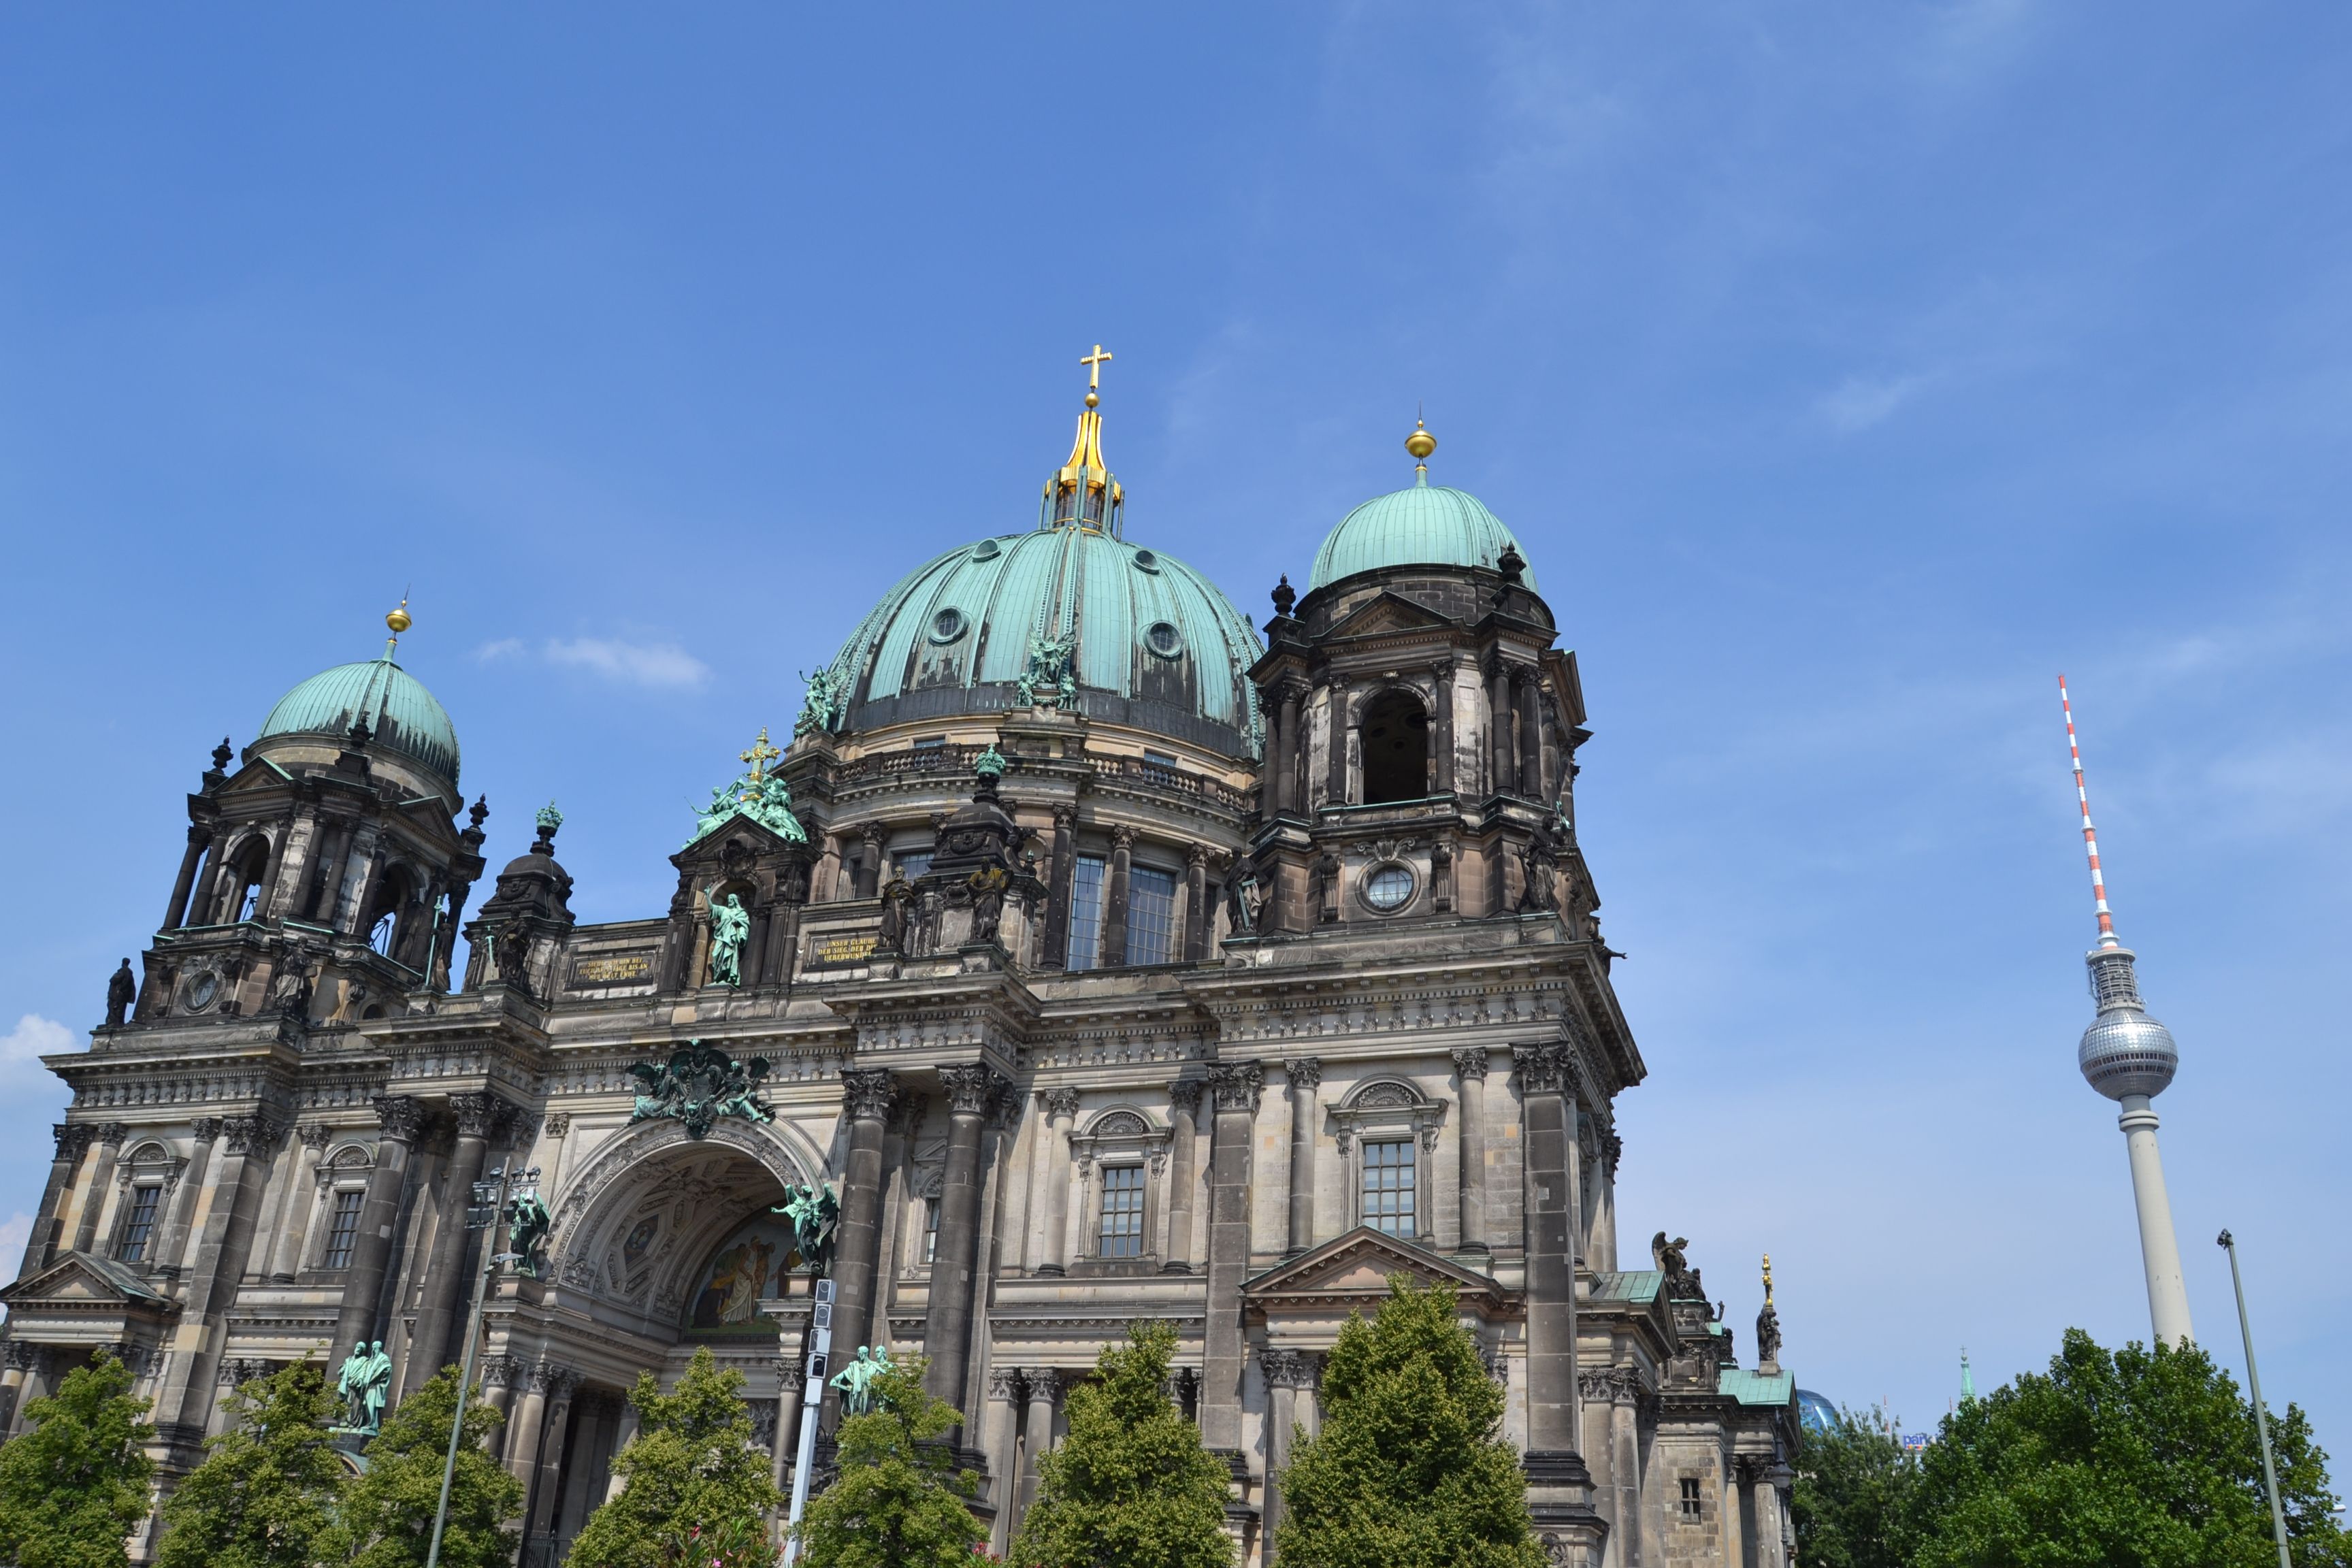 The Berlin Cathedral with the famous 'TV Tower' in the background against a bright blue sky